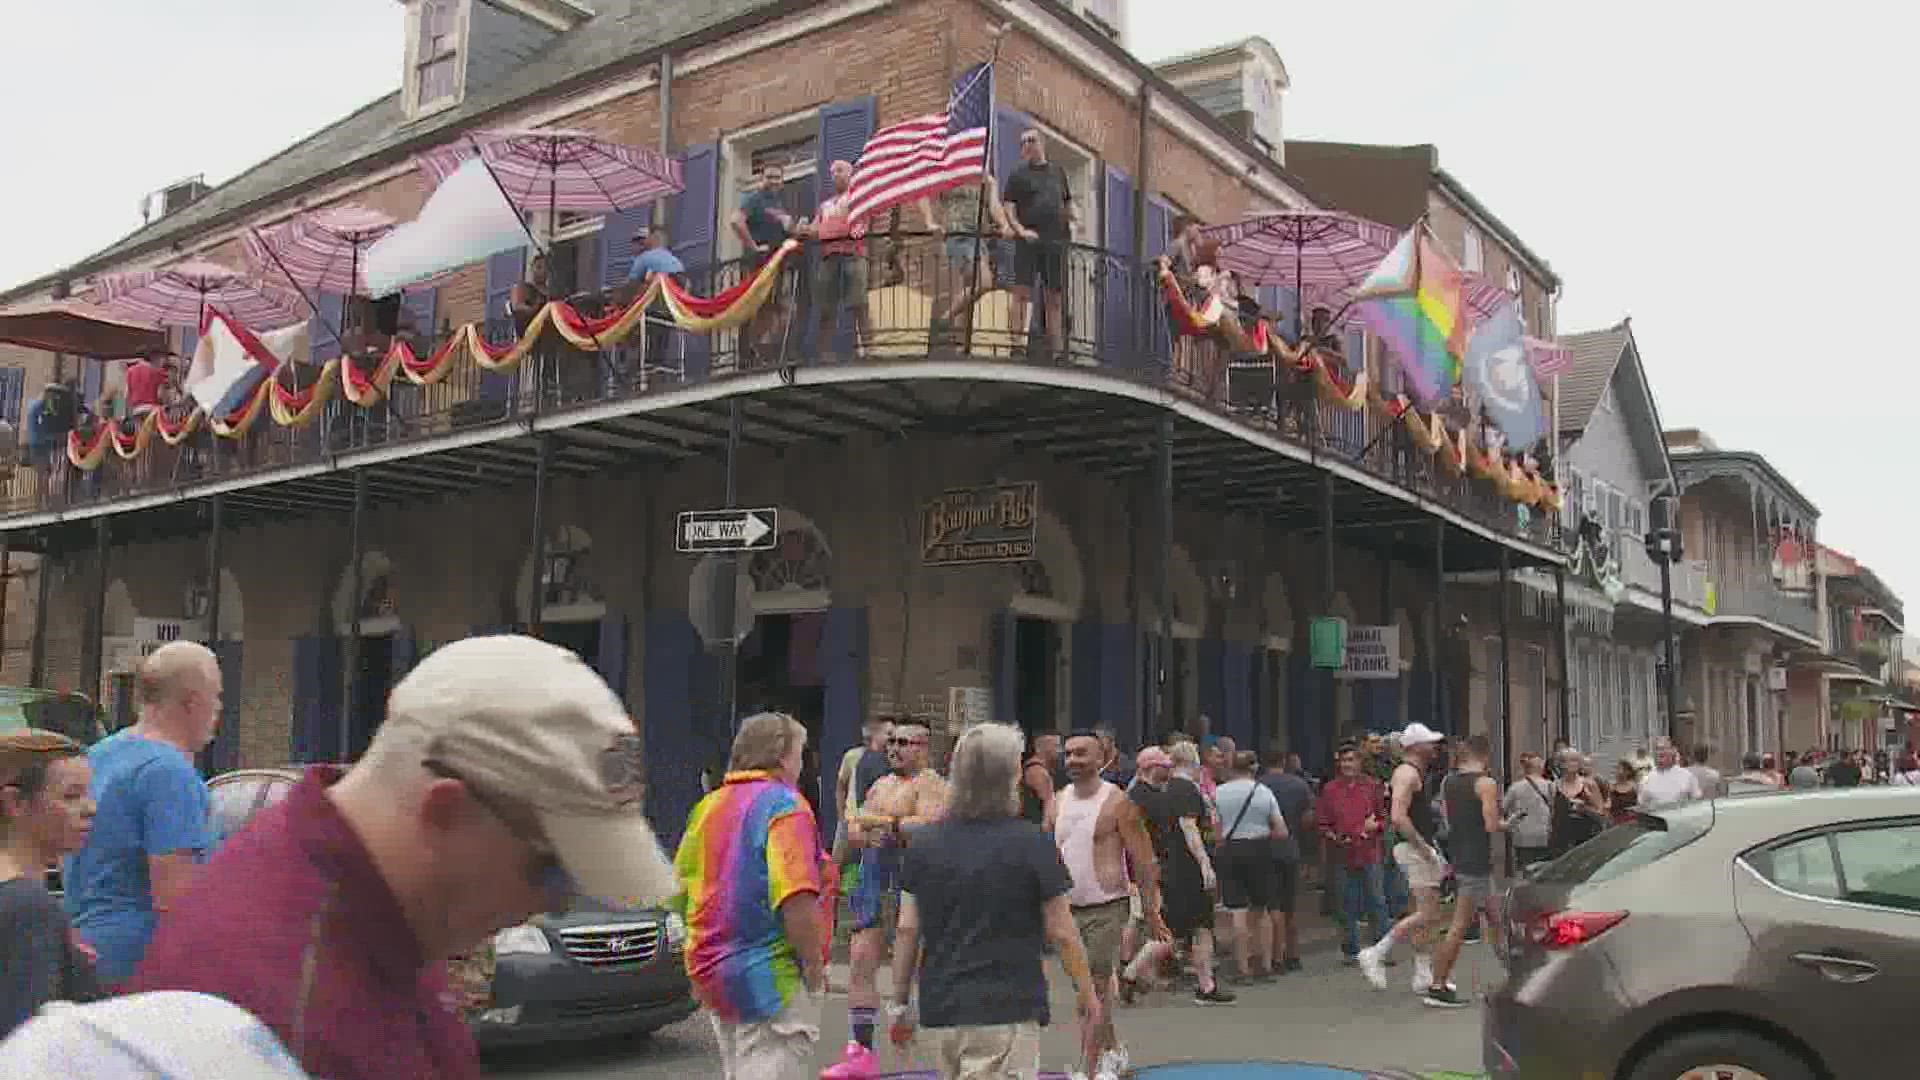 Southern Decadence and LSU football expected to draw people to New Orleans.